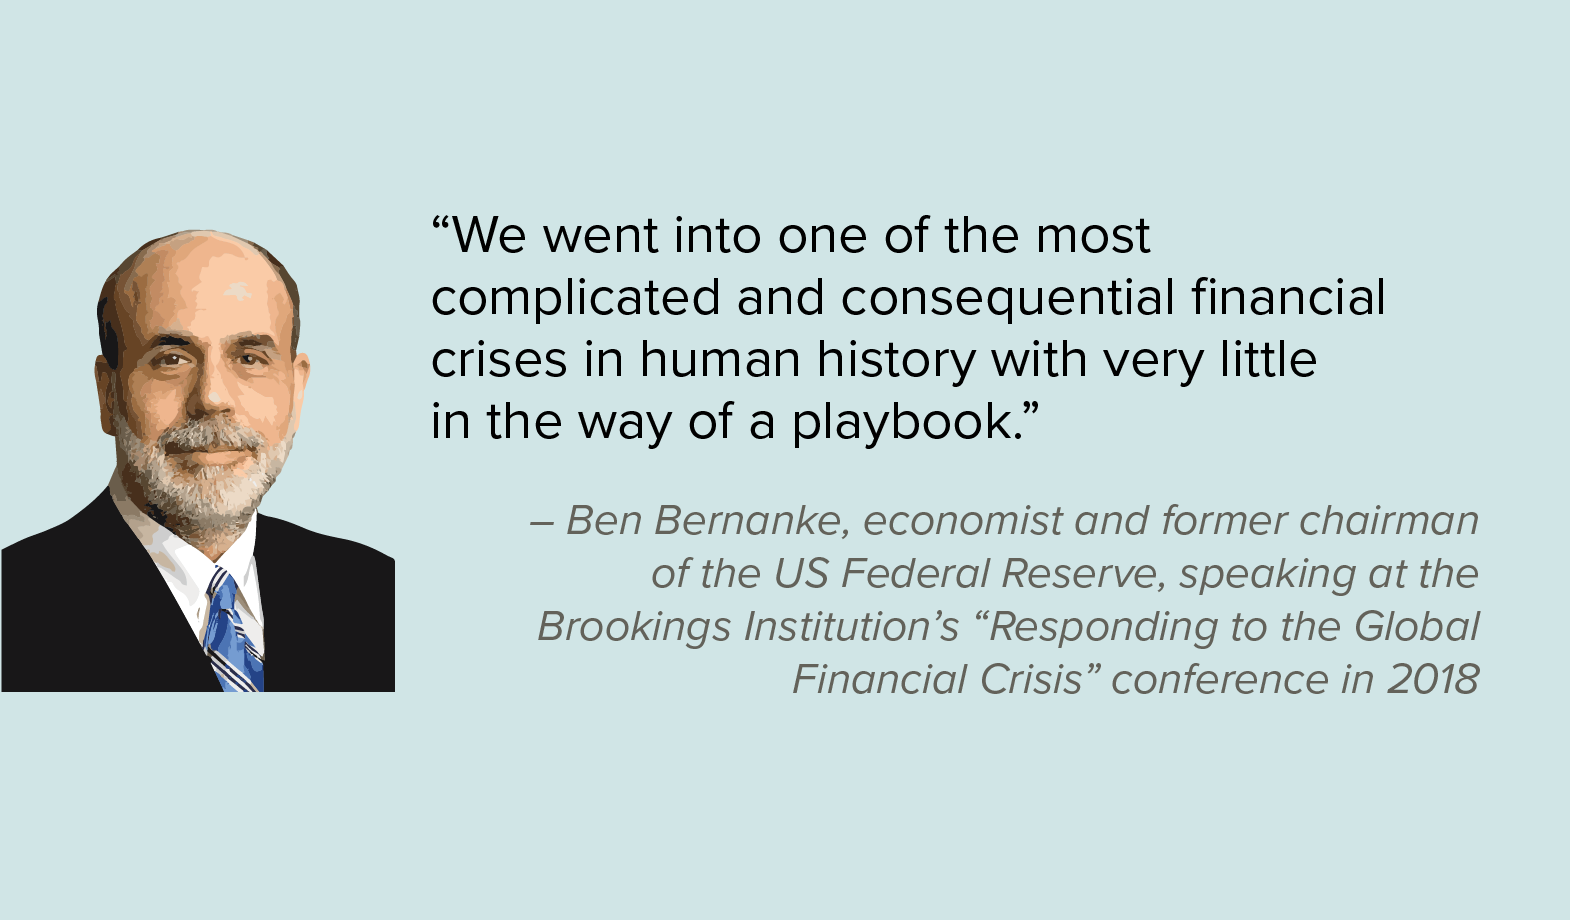 “We went into one of the most complicated and consequential financial crises in human history with very little in the way of a playbook.“ 